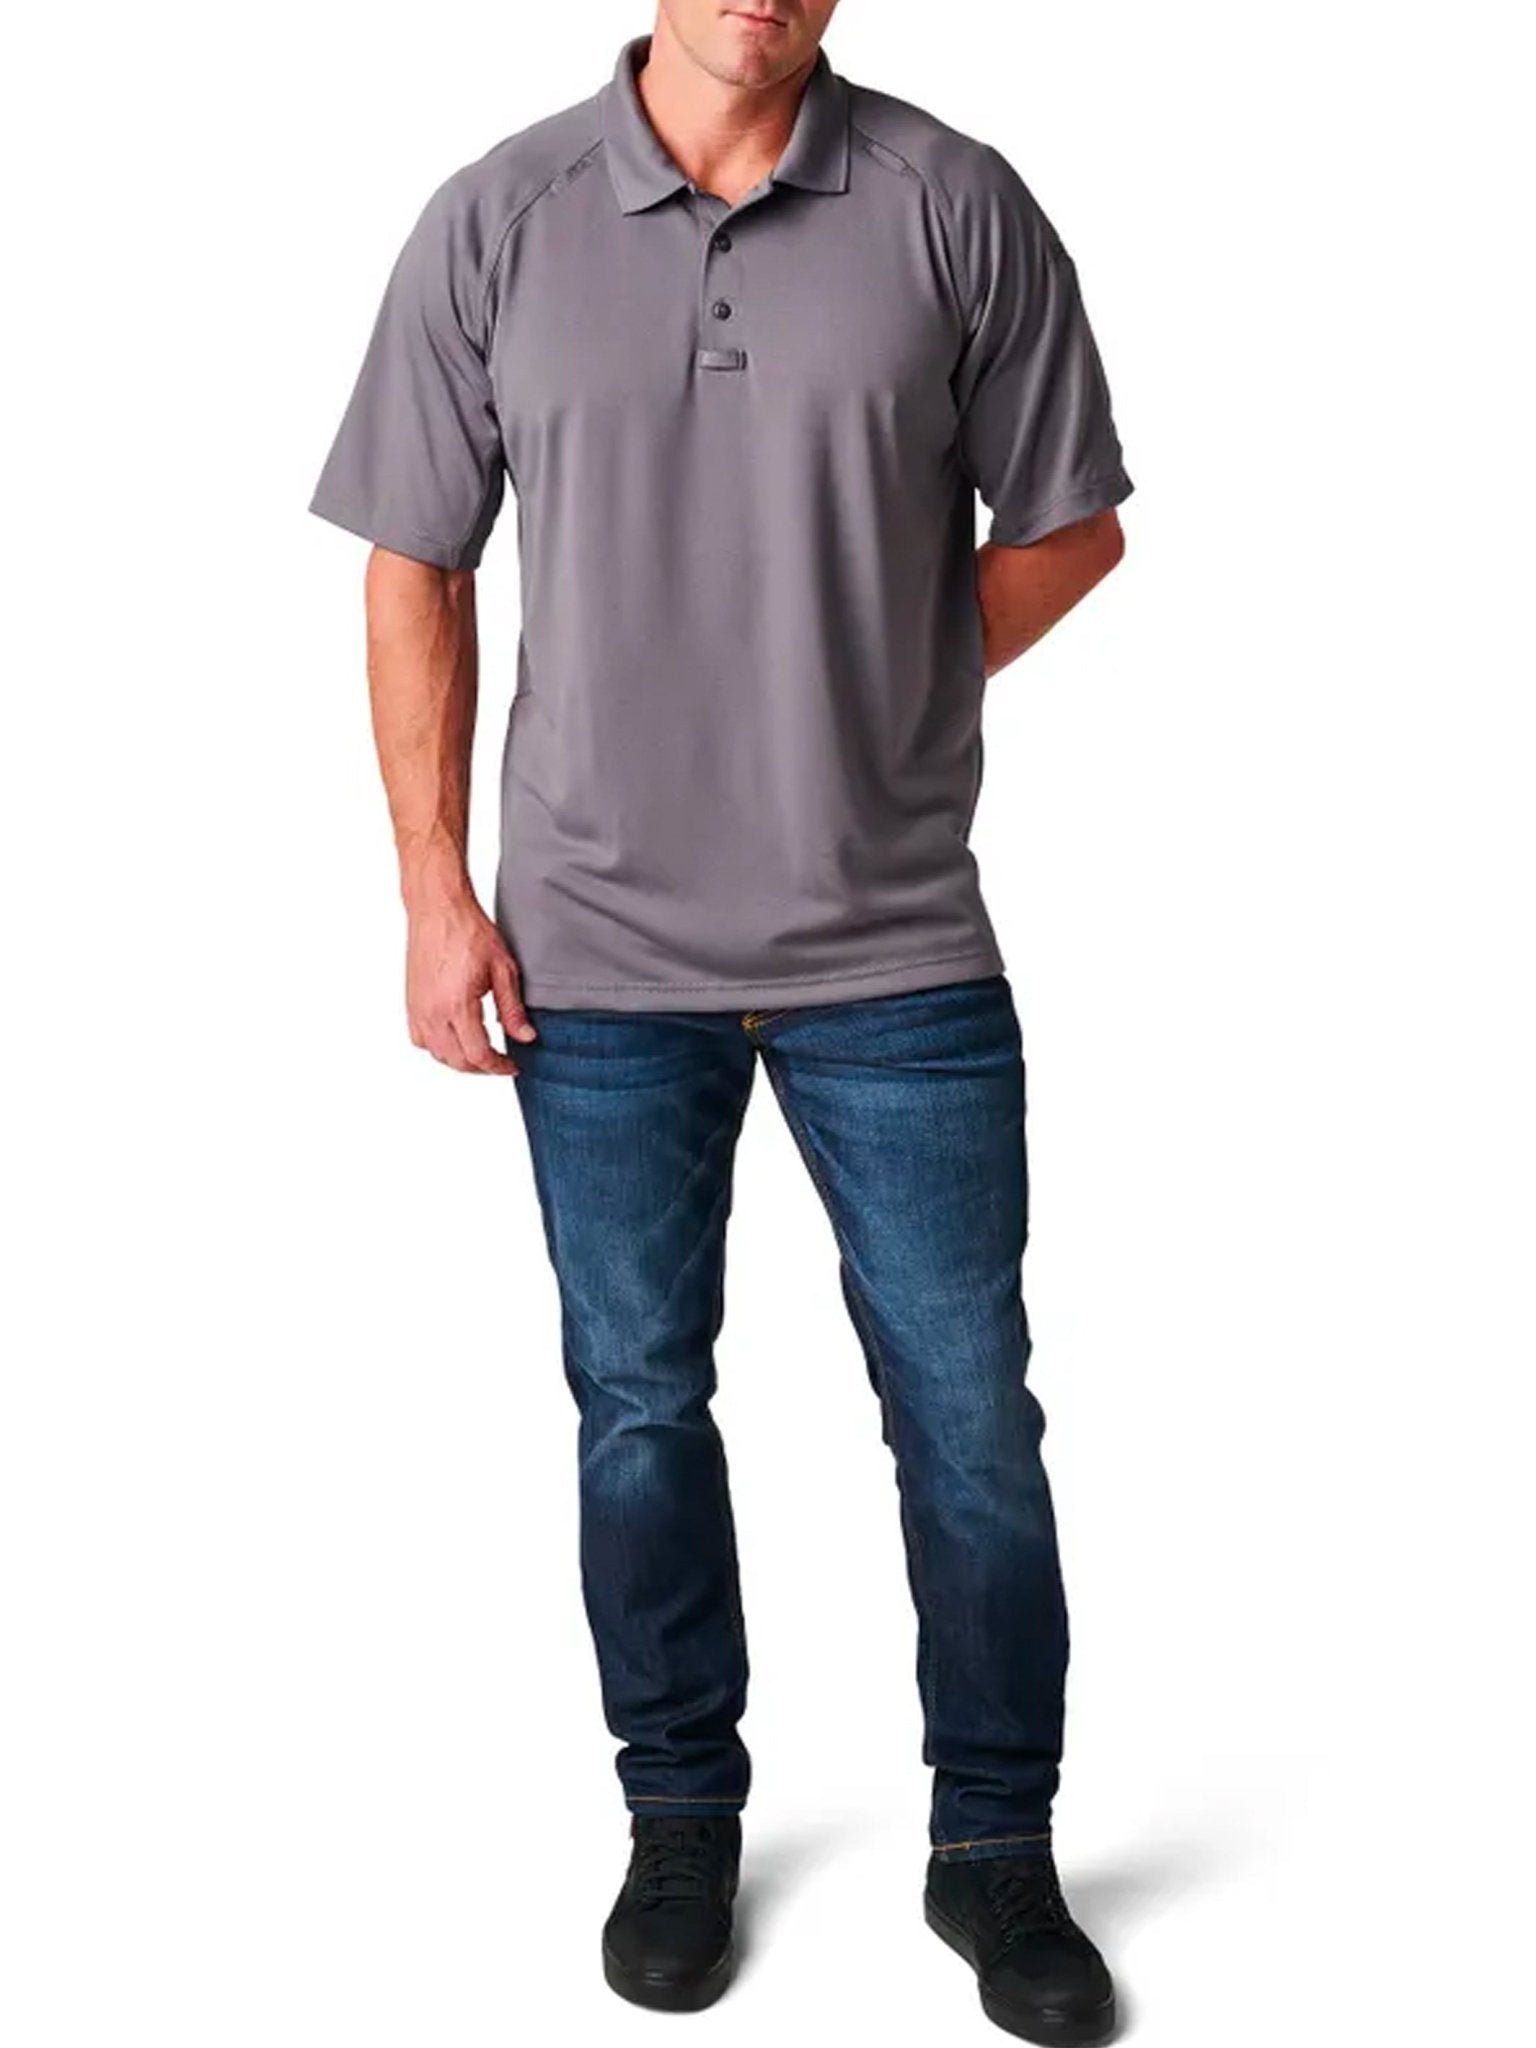 4elementsclothing5.11 Tactical5.11 Tactical - 5.11 Performance Short Sleeve Polo Shirt - Quick Dry moisture wicking - Style 71049T-Shirt71049-092-XS